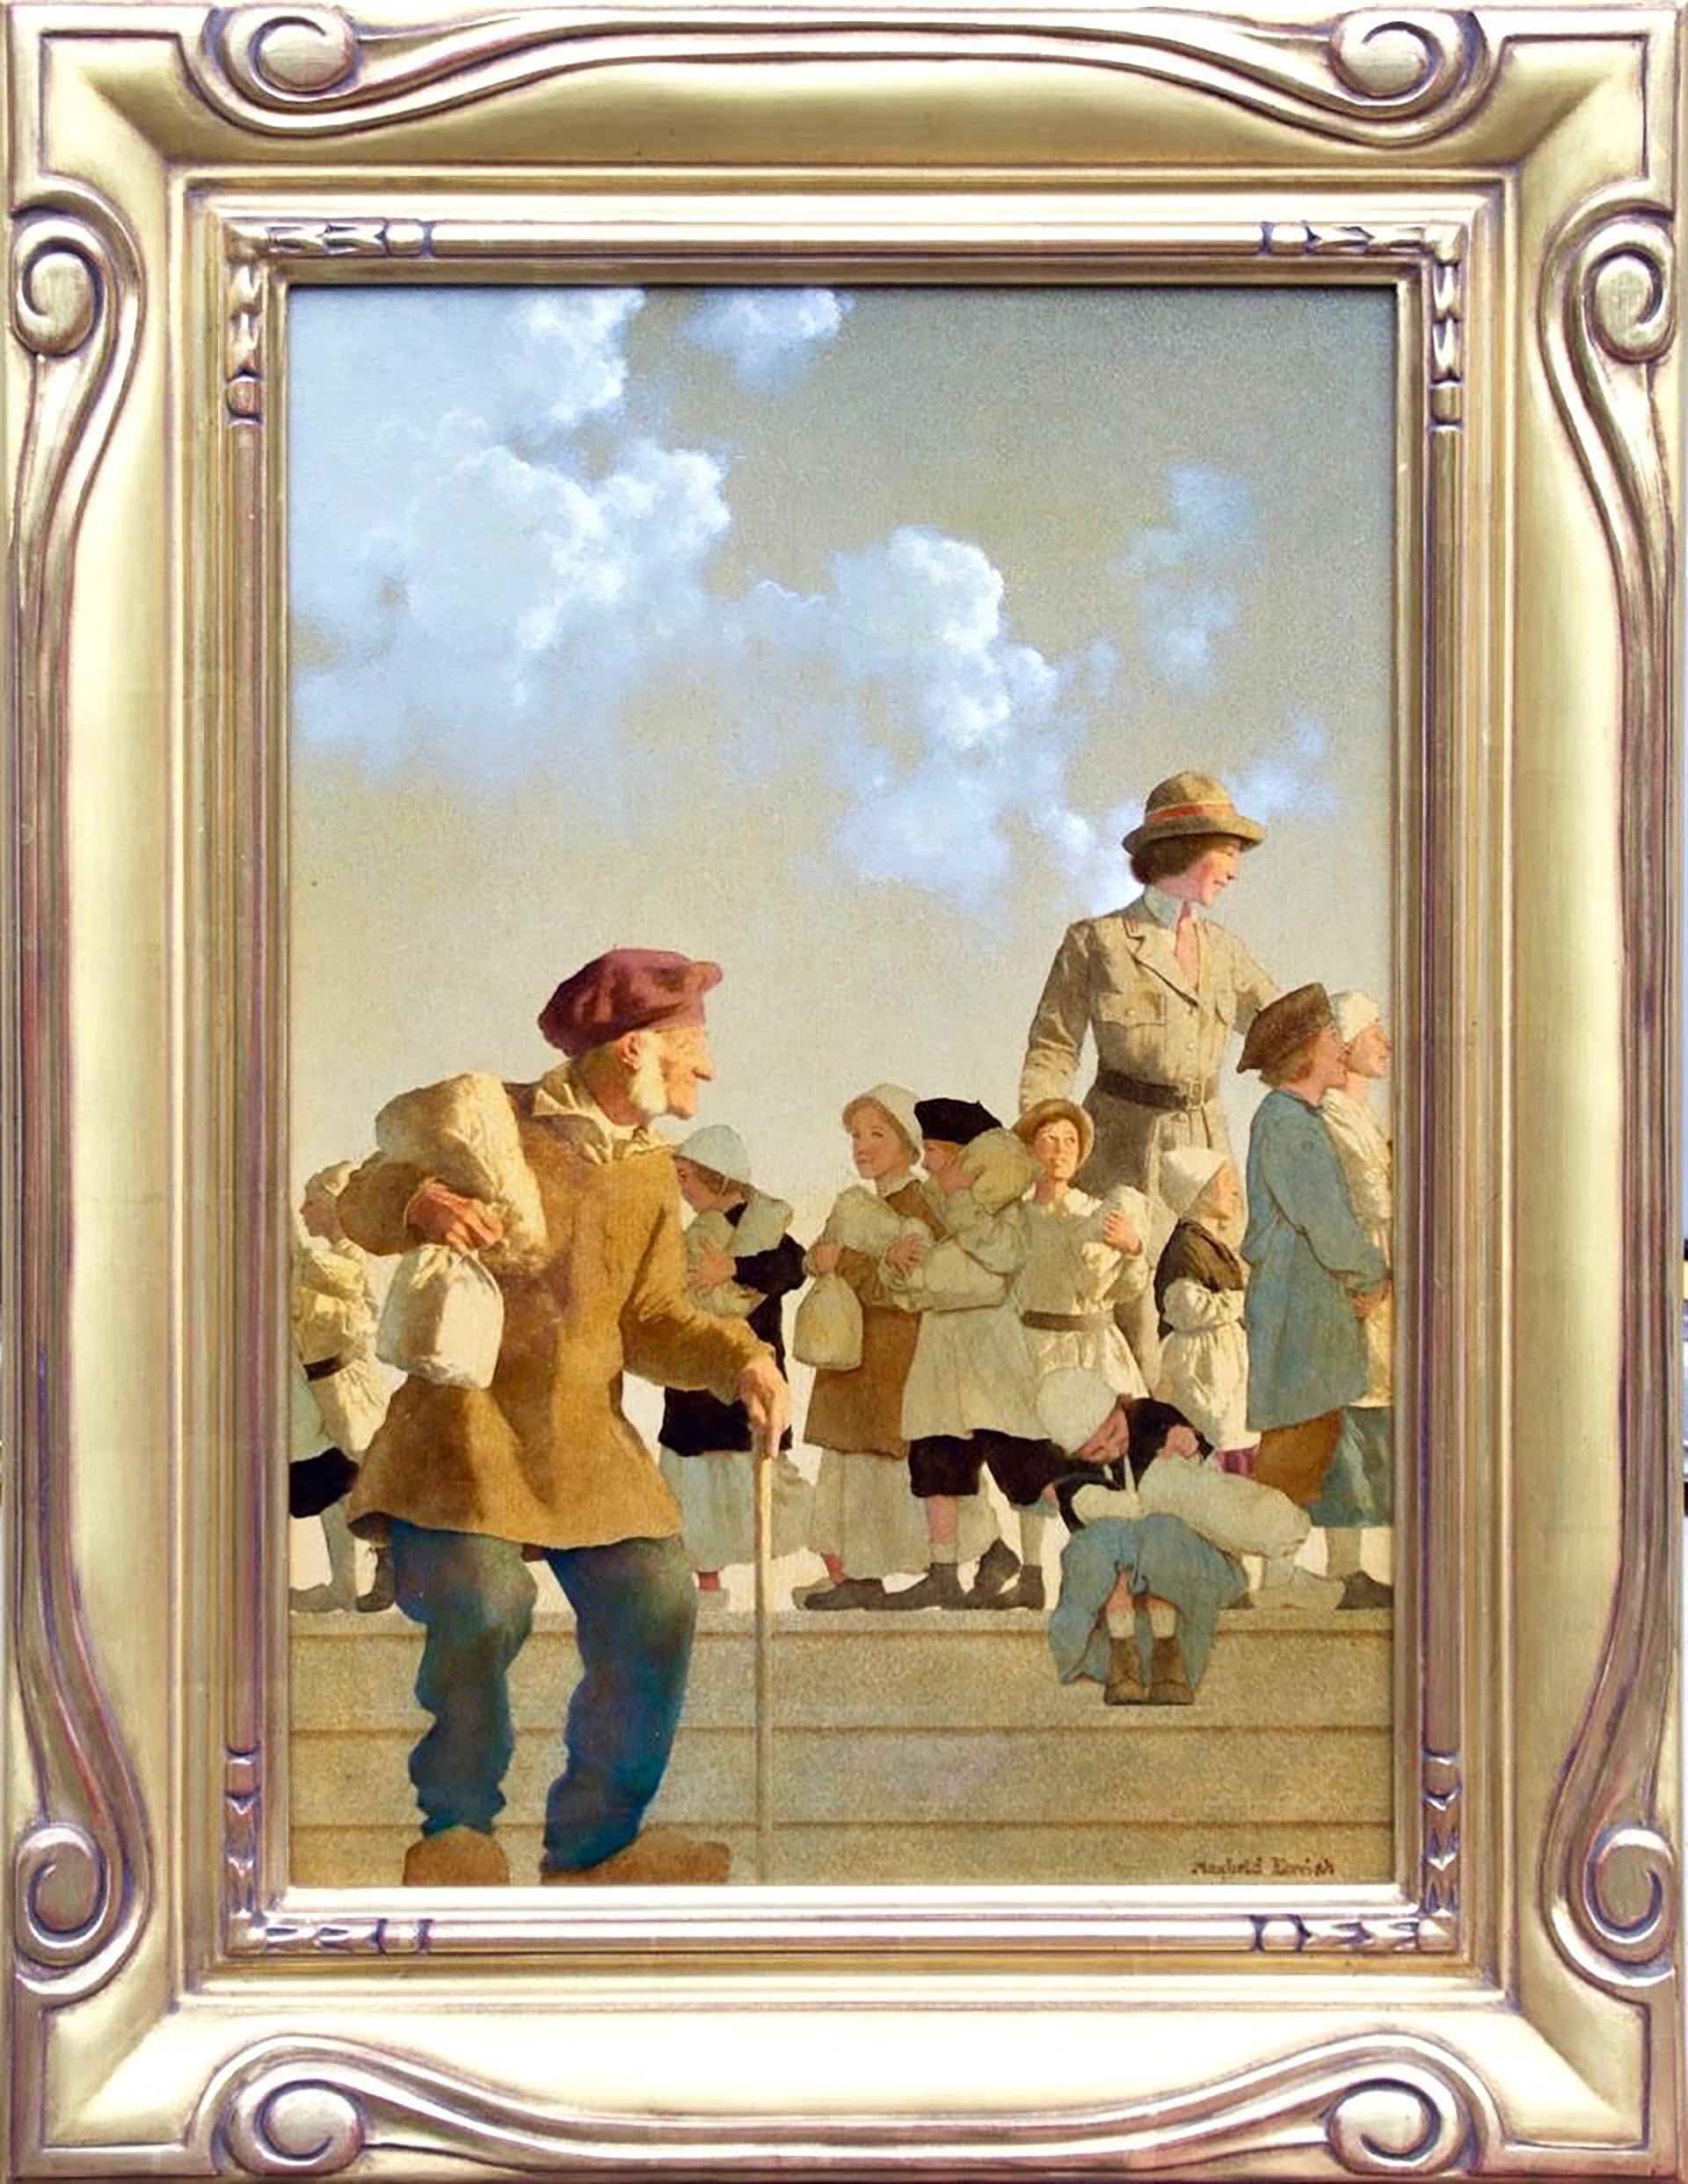 Original Illustration for The Red Cross - Painting by Maxfield Parrish